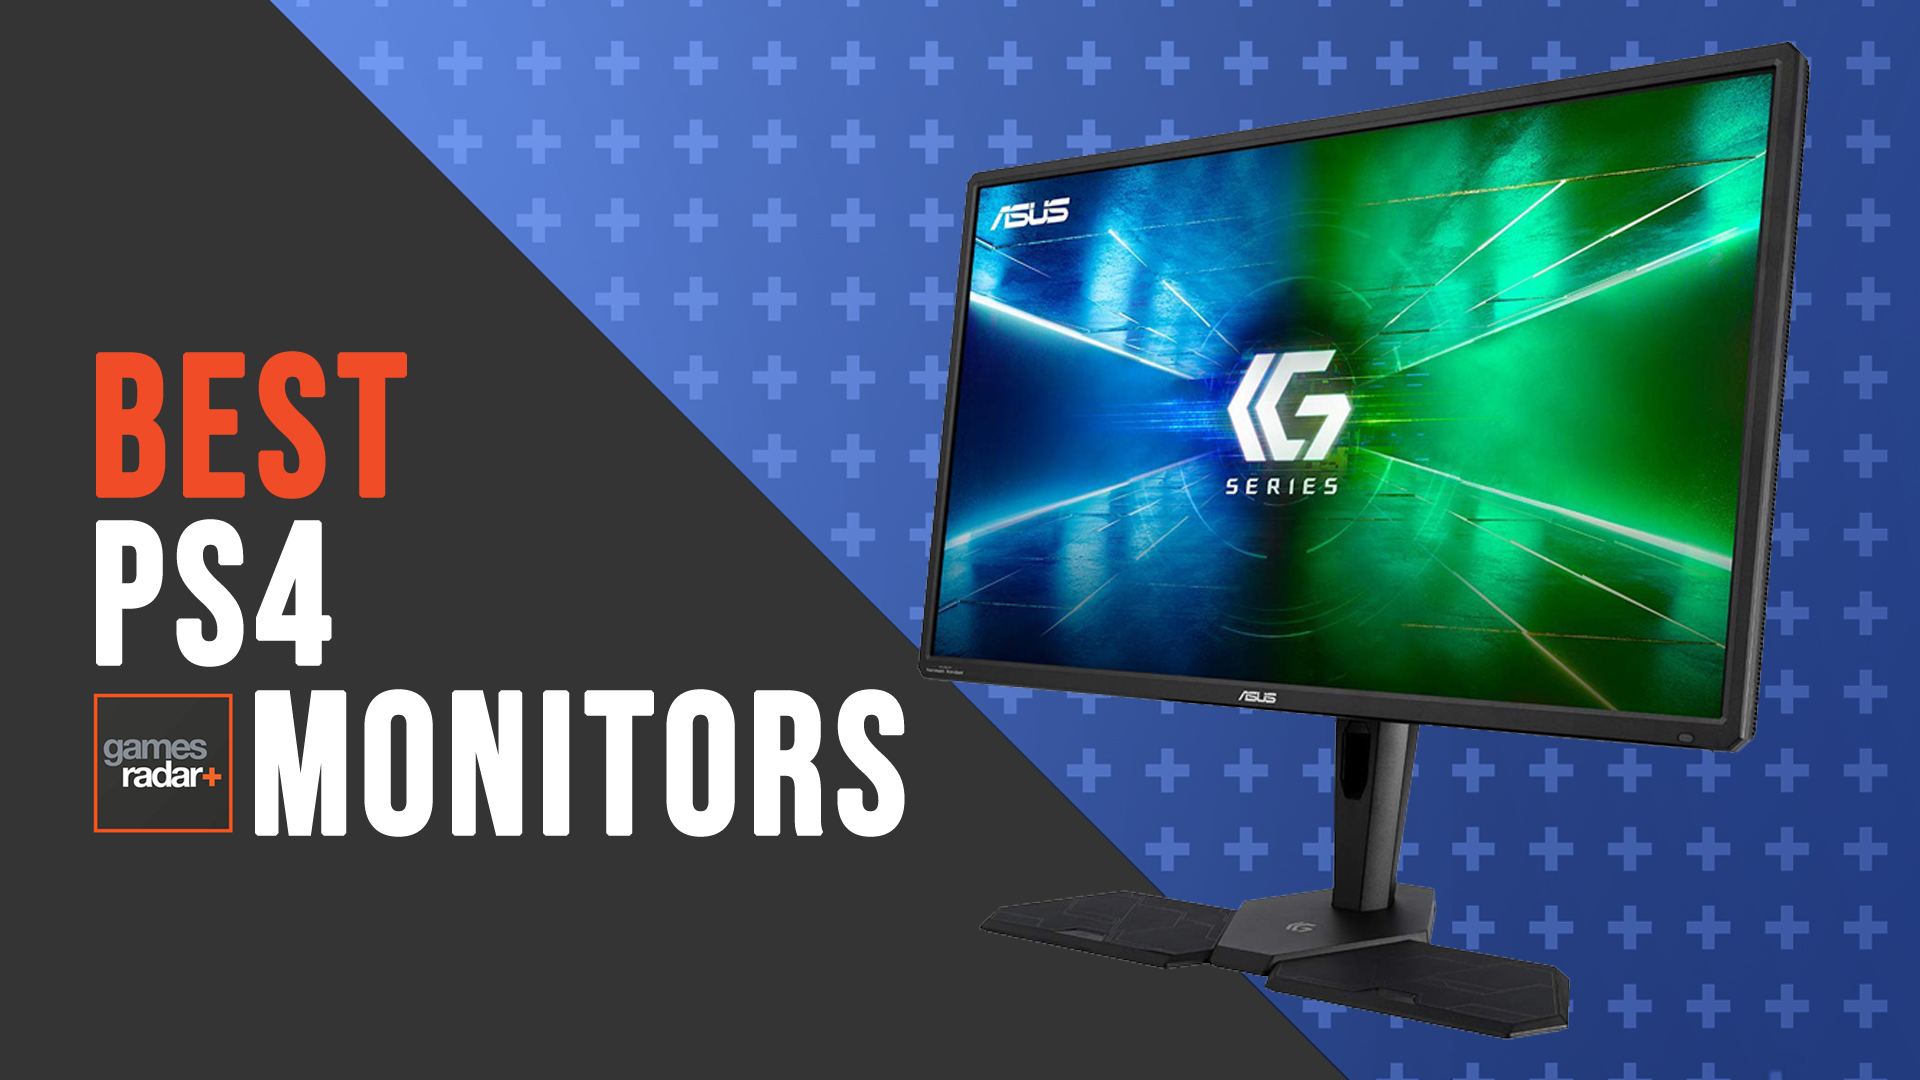 The best PS4 monitors for 2021